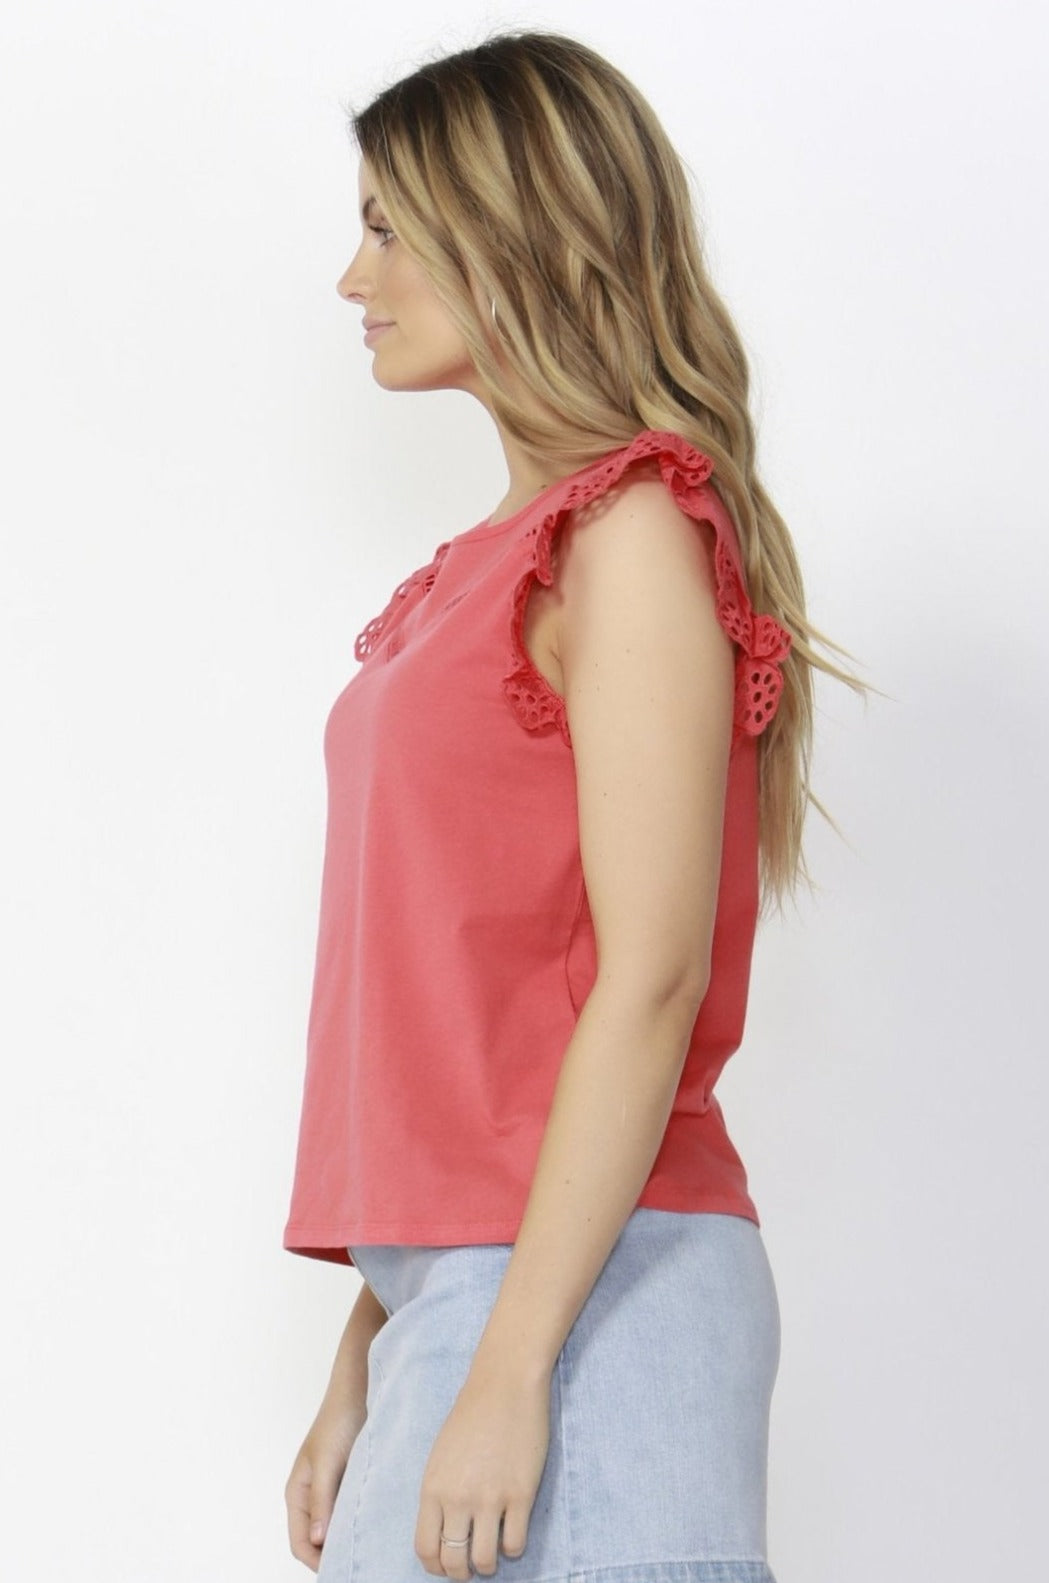 Sass Sweet Escape Lace Top in Watermelon - Hey Sara